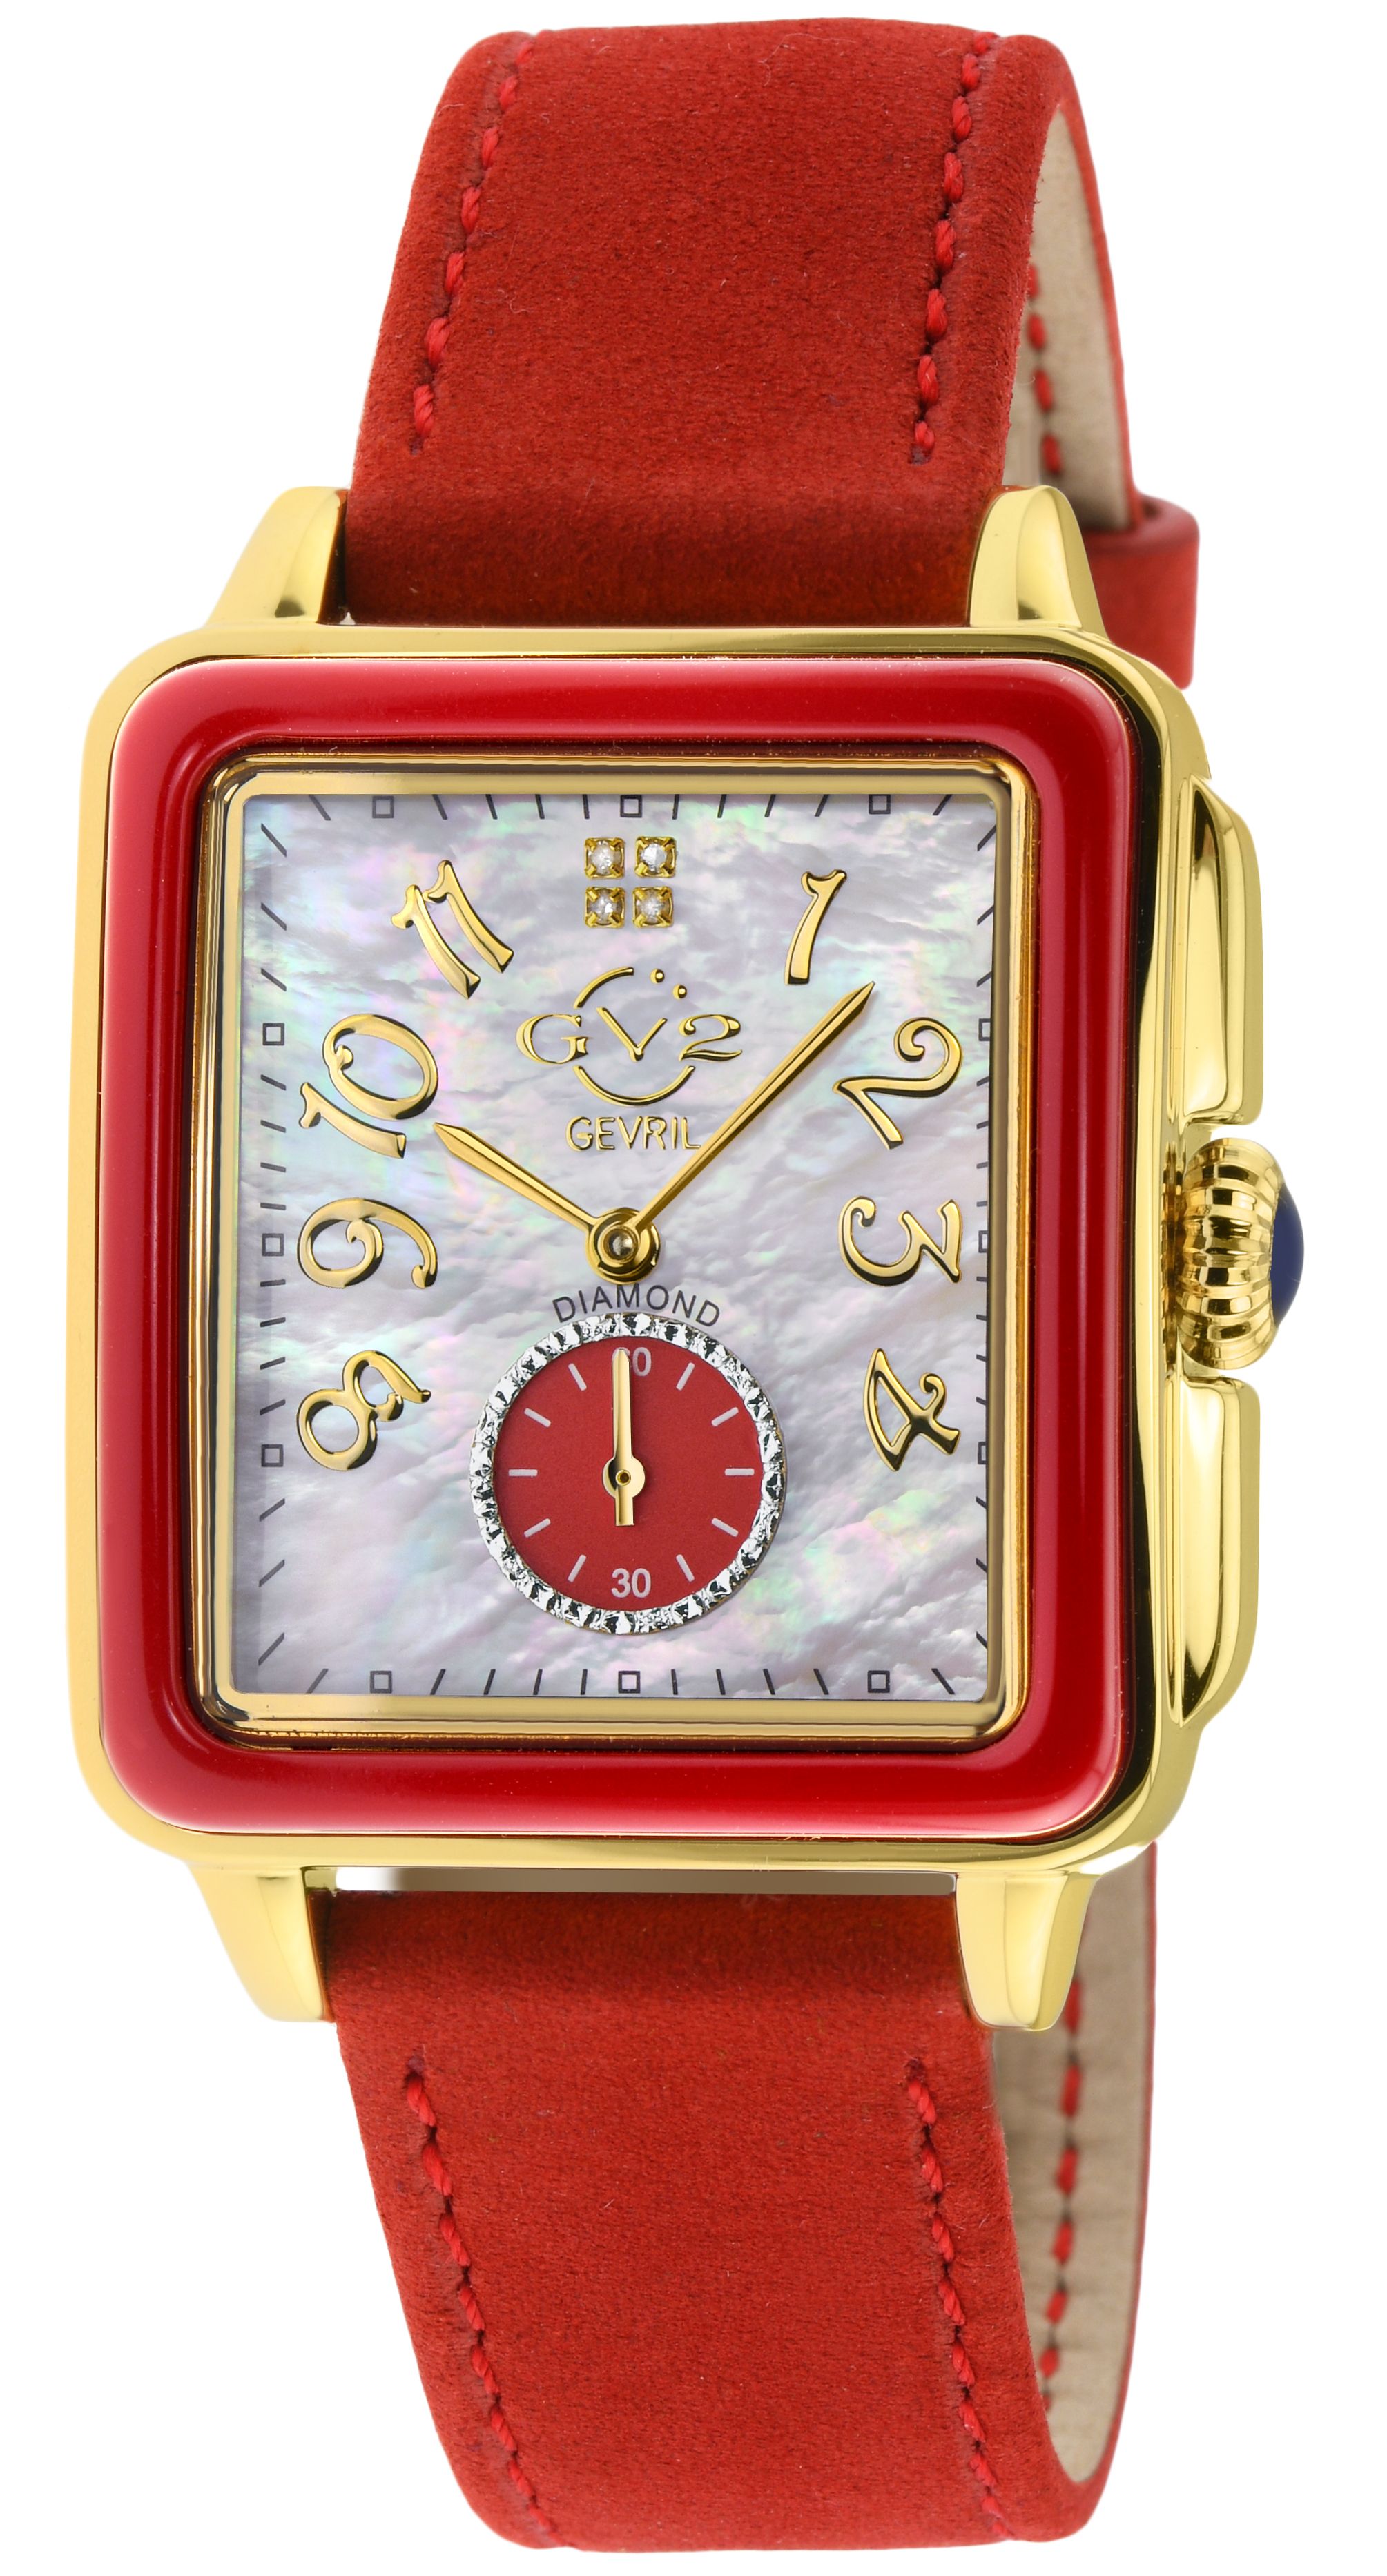 GV2 9261 Bari Enamel Swiss Quartz Diamond Watch
GV2 Women's Swiss Watch from the Bari Collection
37 mm Square 316L Stainless Steel IPYG Case, Red Enamel Bezel
White MOP Dial, 4 Diamonds at 12:00, Red Diamond Cut ring at 6:00
Push Pull Fluted crown with Blue cabochon Stone
Genuine Italian Red Suede Leather Strap with Tang Buckle
Anti-reflective Sapphire Crystal
Water Resistant to 50 Meters/5ATM
Swiss Quartz Movement Ronda 1069